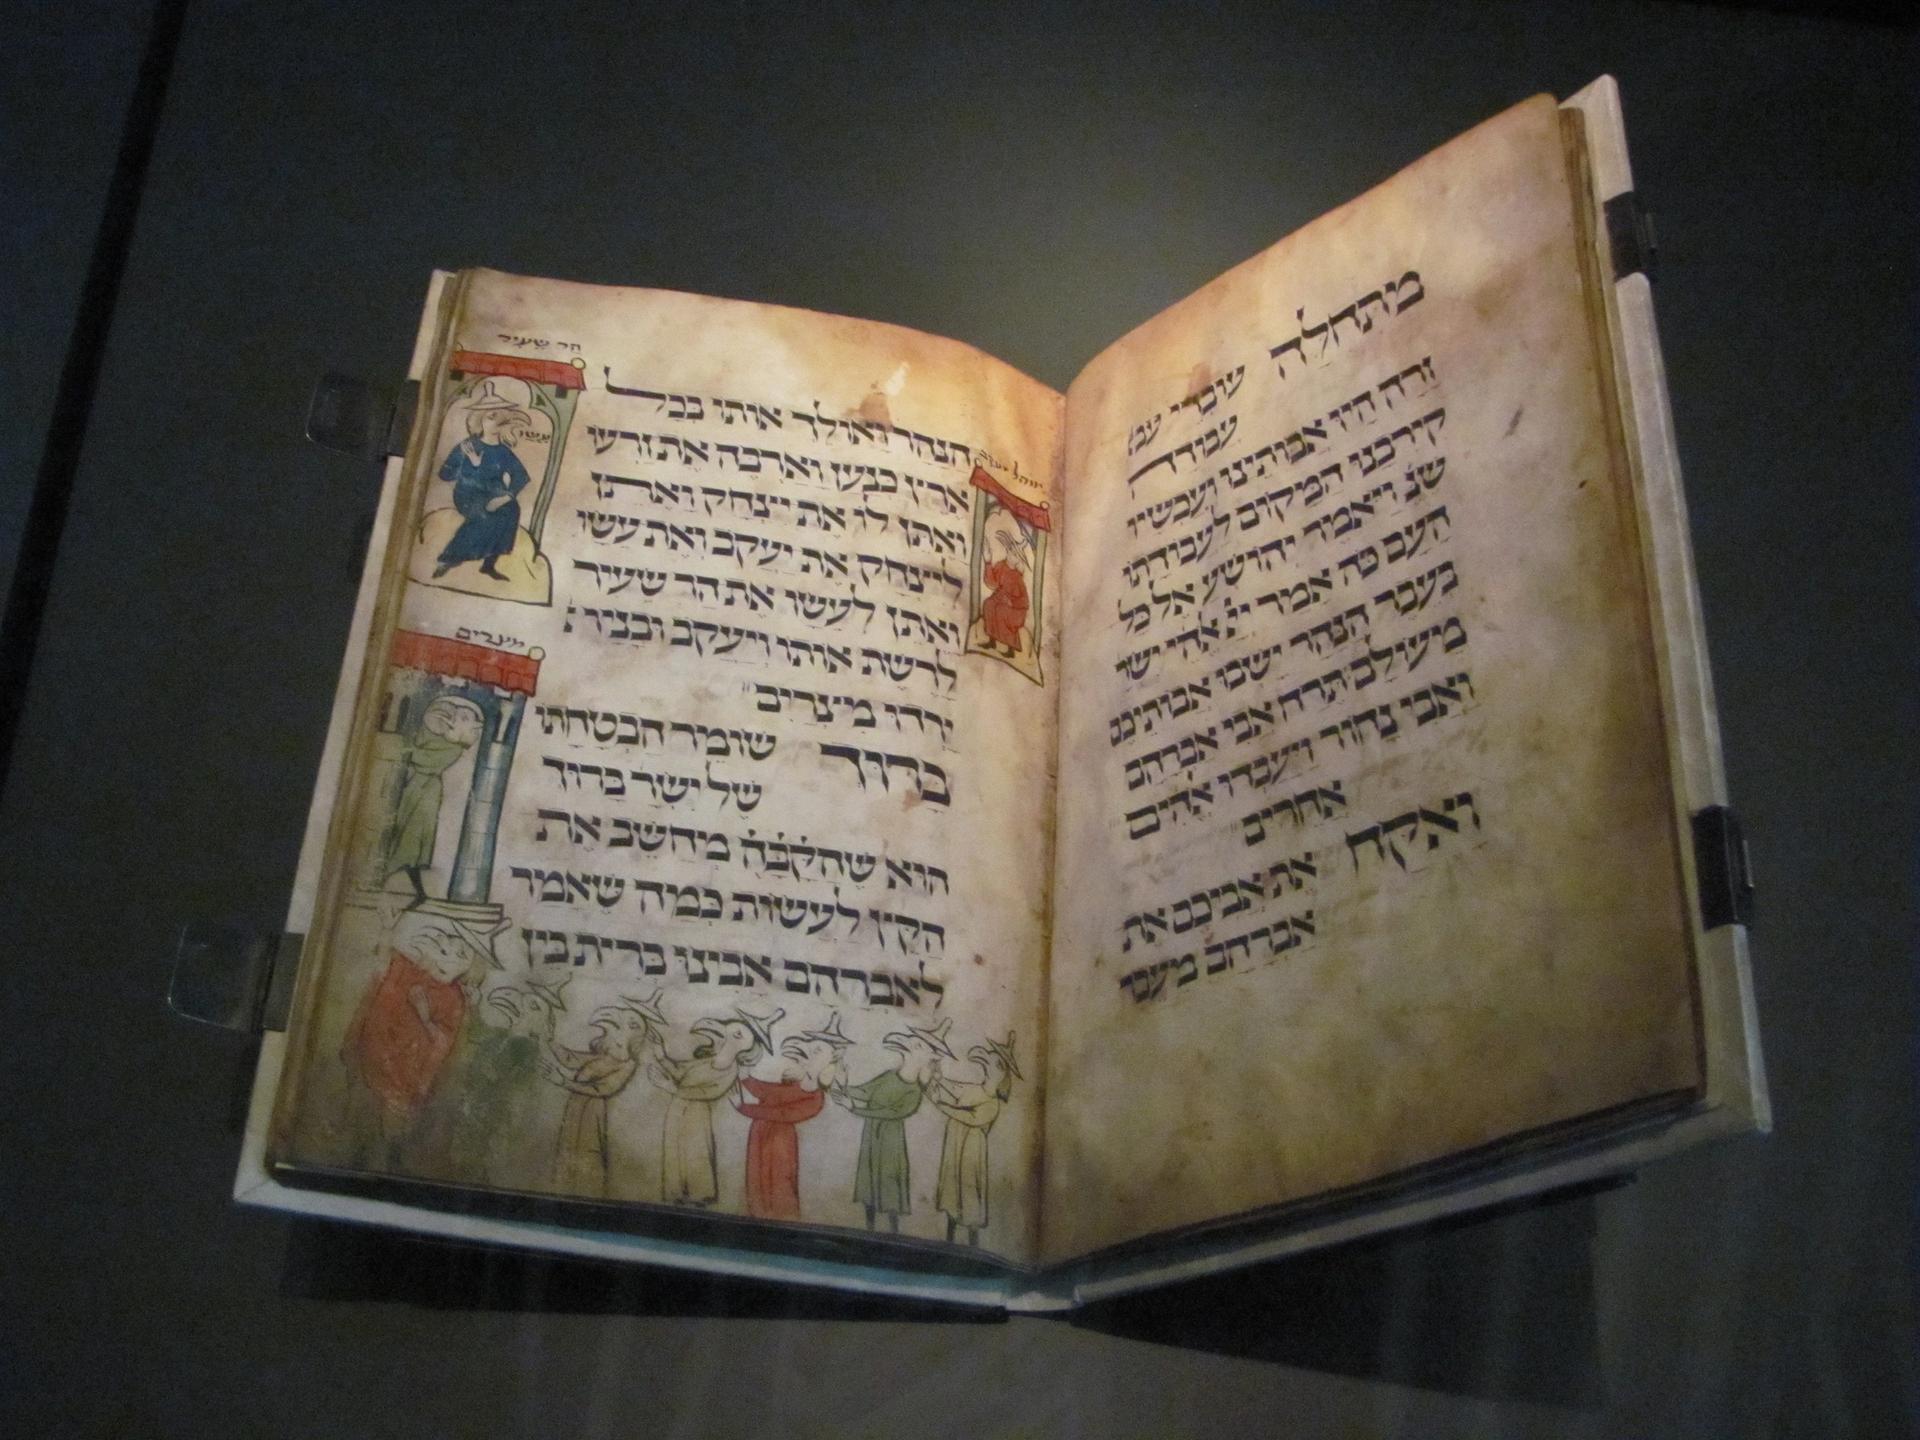 The Birds' Head Haggadah (around 1300) is currently displayed in the Israel Museum, Jerusalem.